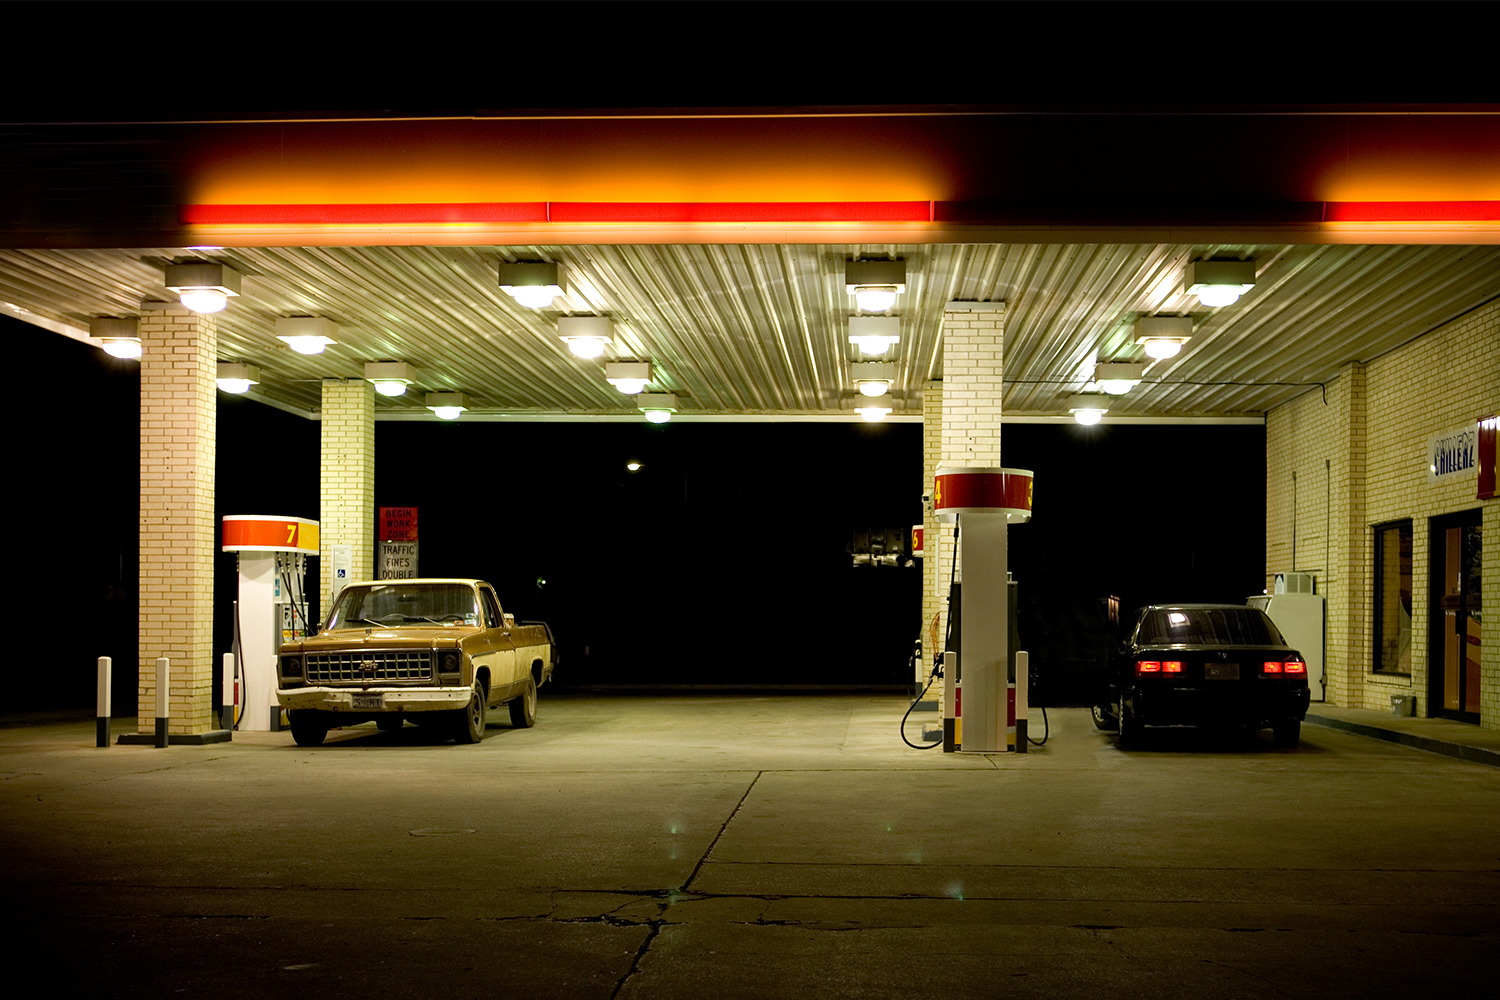 A pickup truck and black car at a gas station at night. Our love of gasoline is a problem when it comes to climate change.